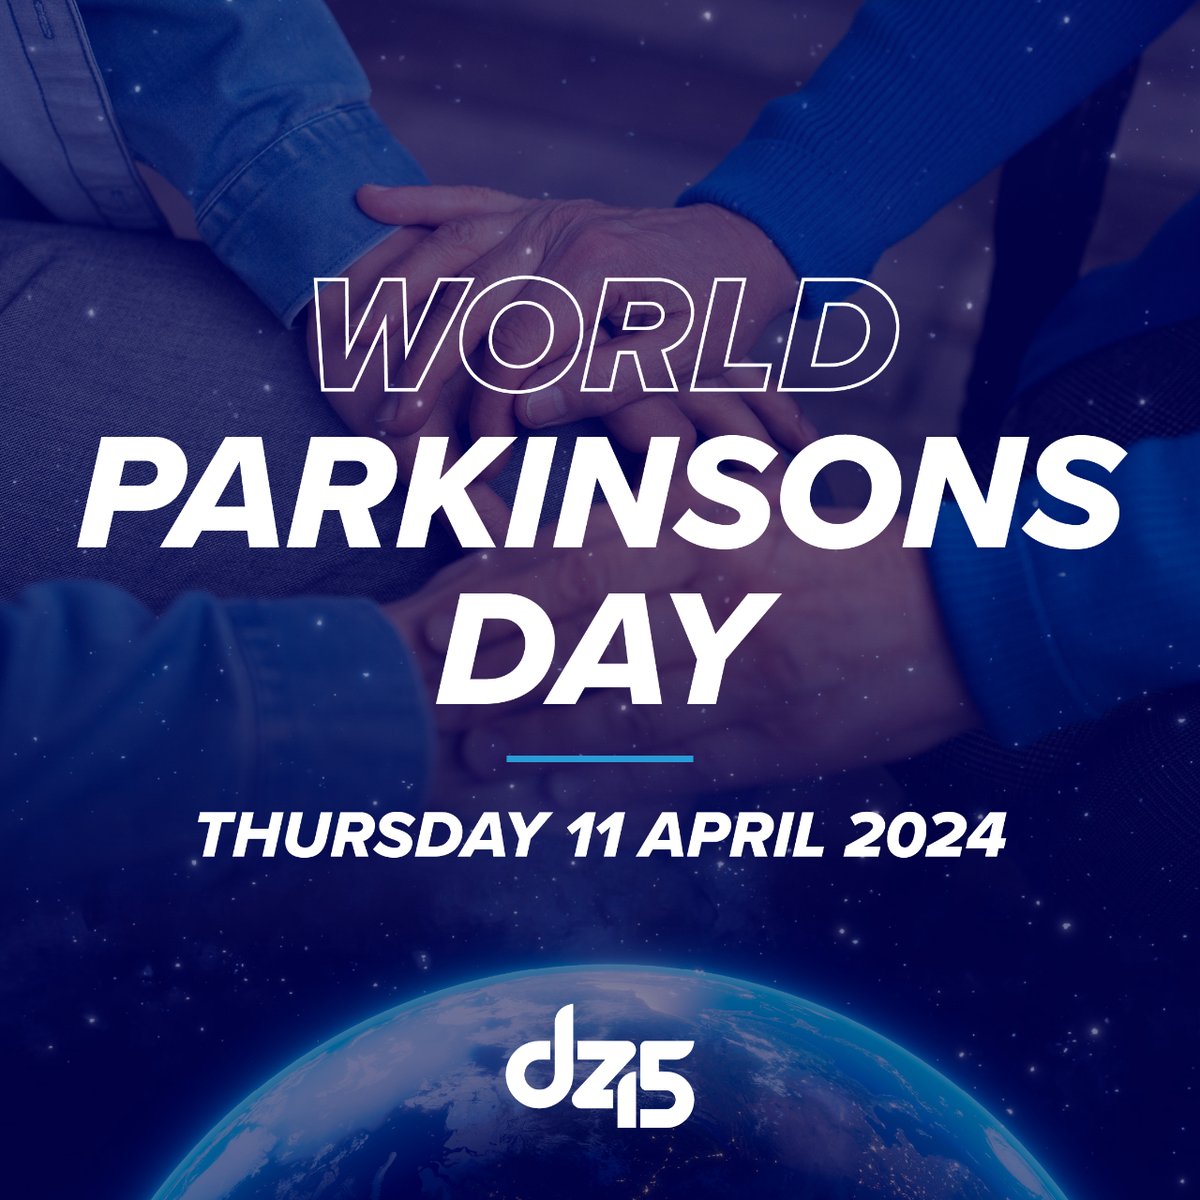 World Parkinson's Day 🌍💙 Thursday 11th April 2024 – something which is very close to my heart. Announcement coming soon🫶 @ParkinsonsUK  #DZ45 #danzelos45 #racingdriver #motorsport #racing #raisingawareness #worldparkinsonsday #parkinsons #awareness #parkinsonsuk #family